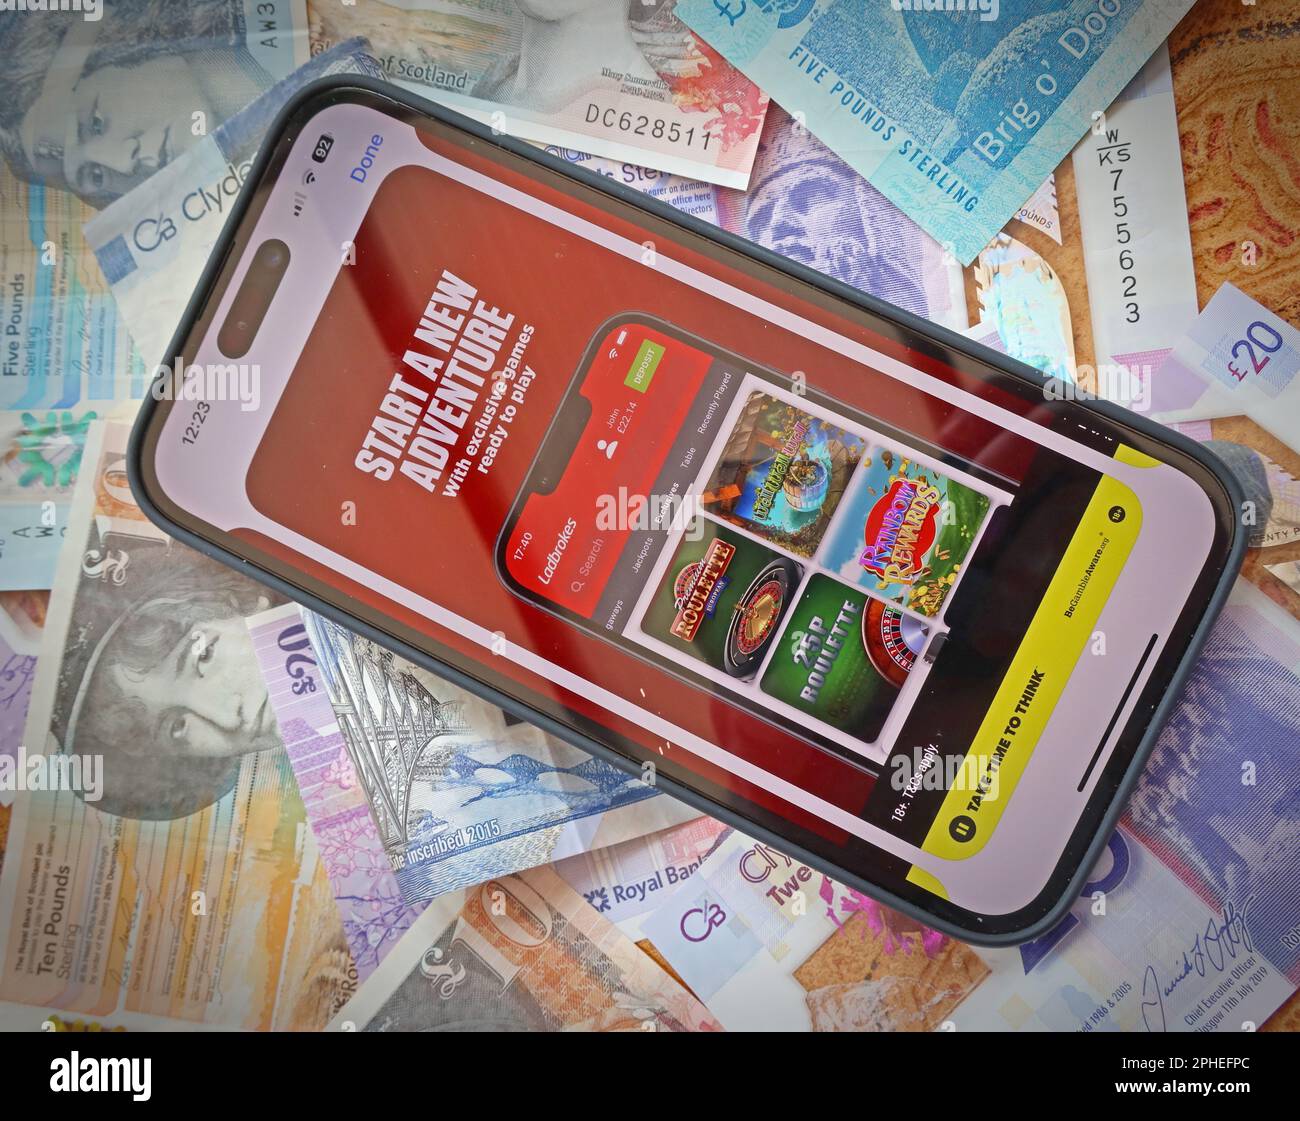 Ladbrokes Smartphone App - Online and smartphone casino, slots and gambling app with Scottish Sterling notes, money easily lost - BeGambleAware Stock Photo